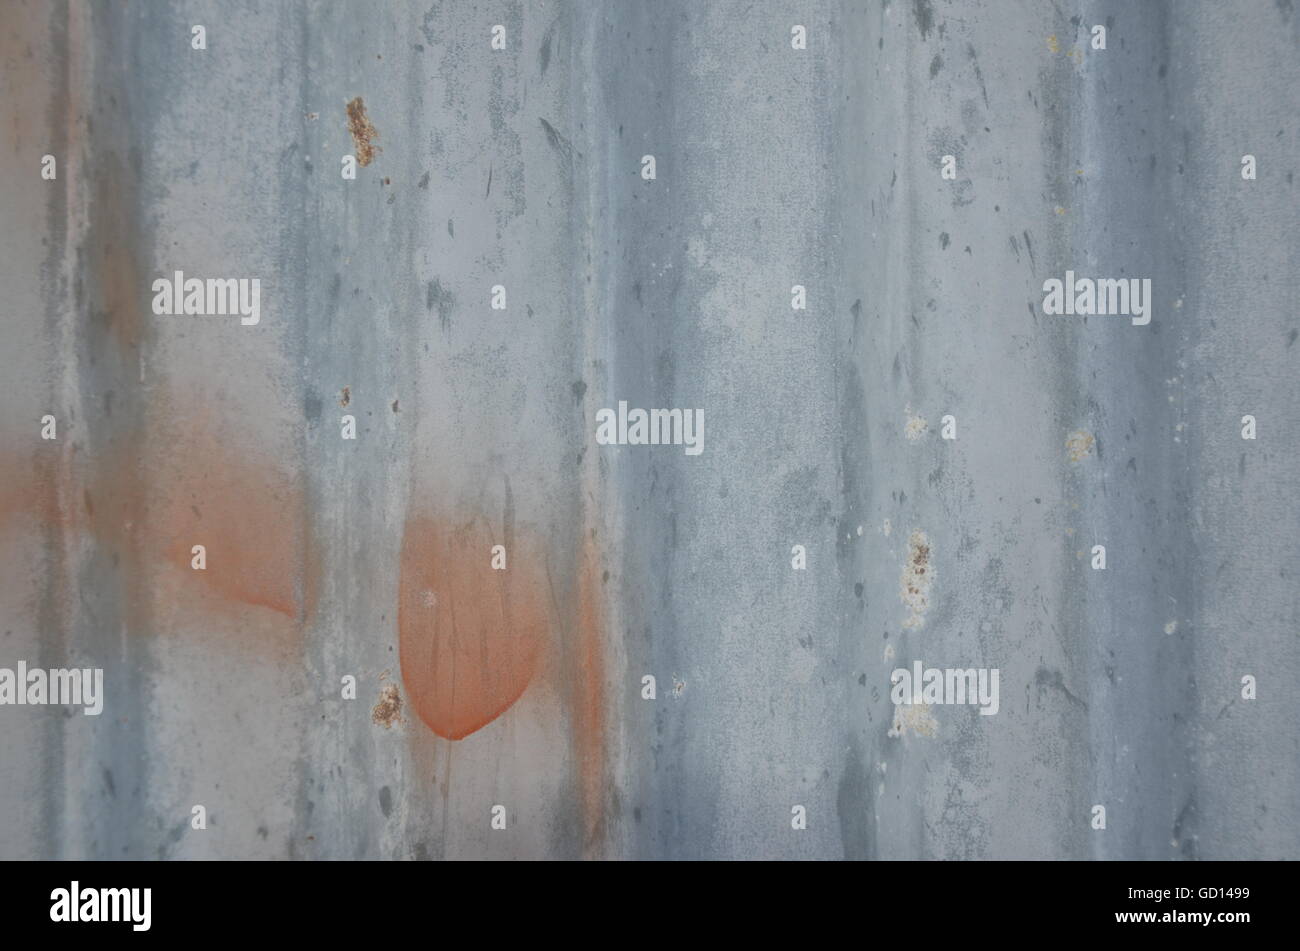 Blue container wall red spots old dirty white spots rippled Stock Photo